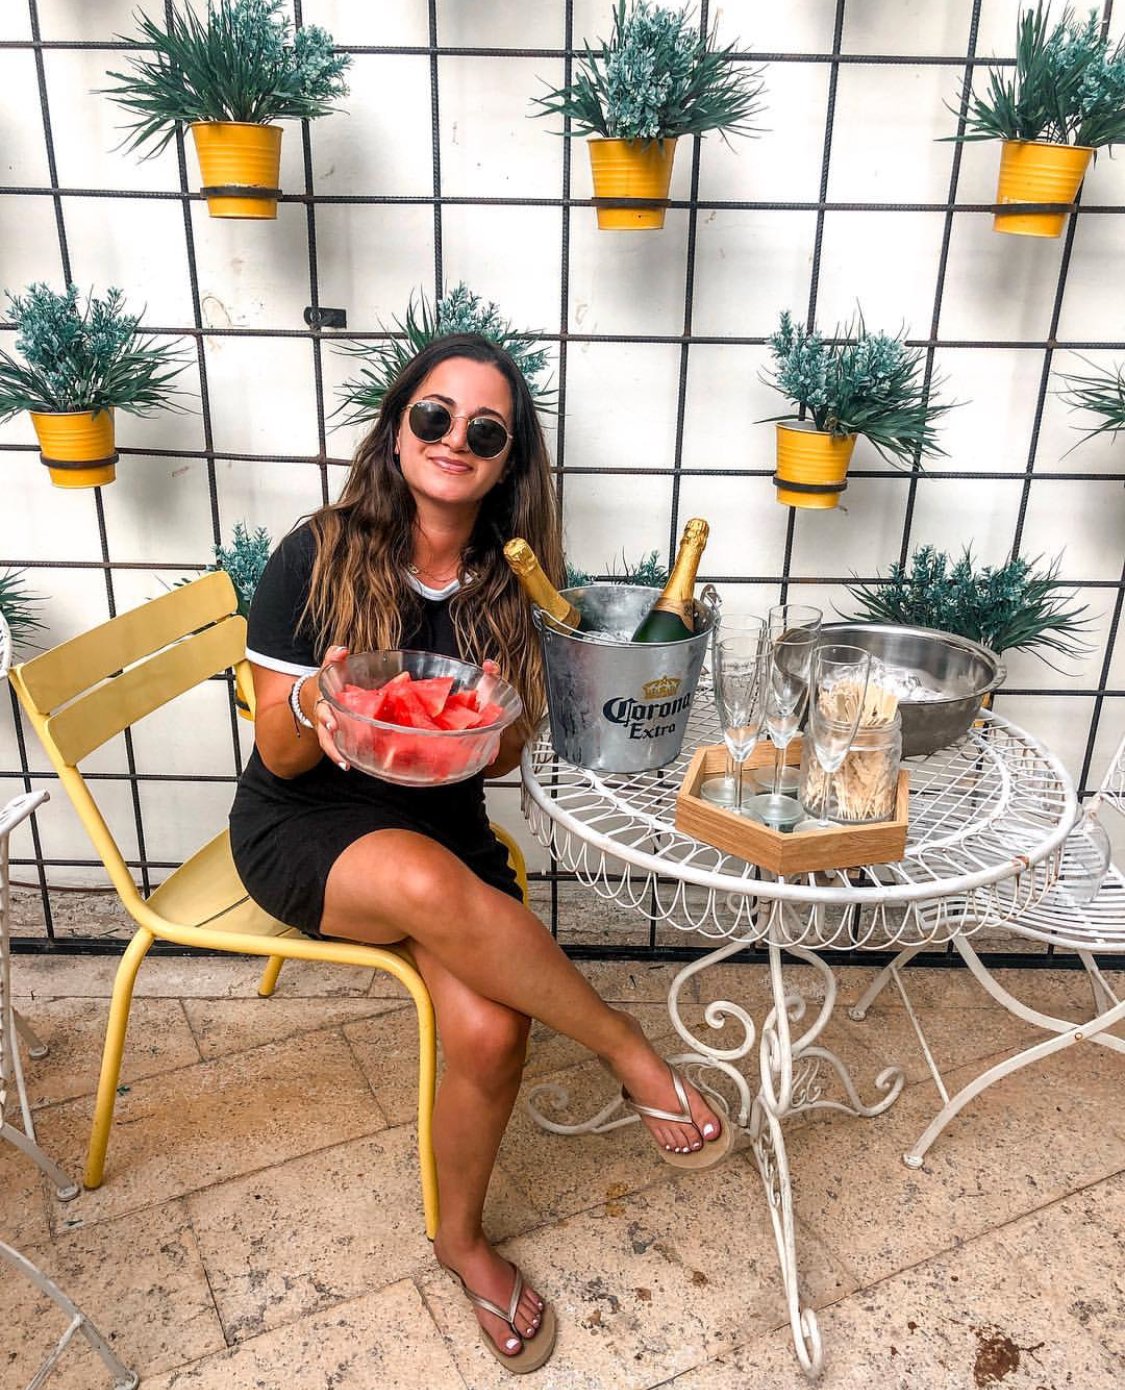 Daily Champagne & Watermelon at The White House TLV